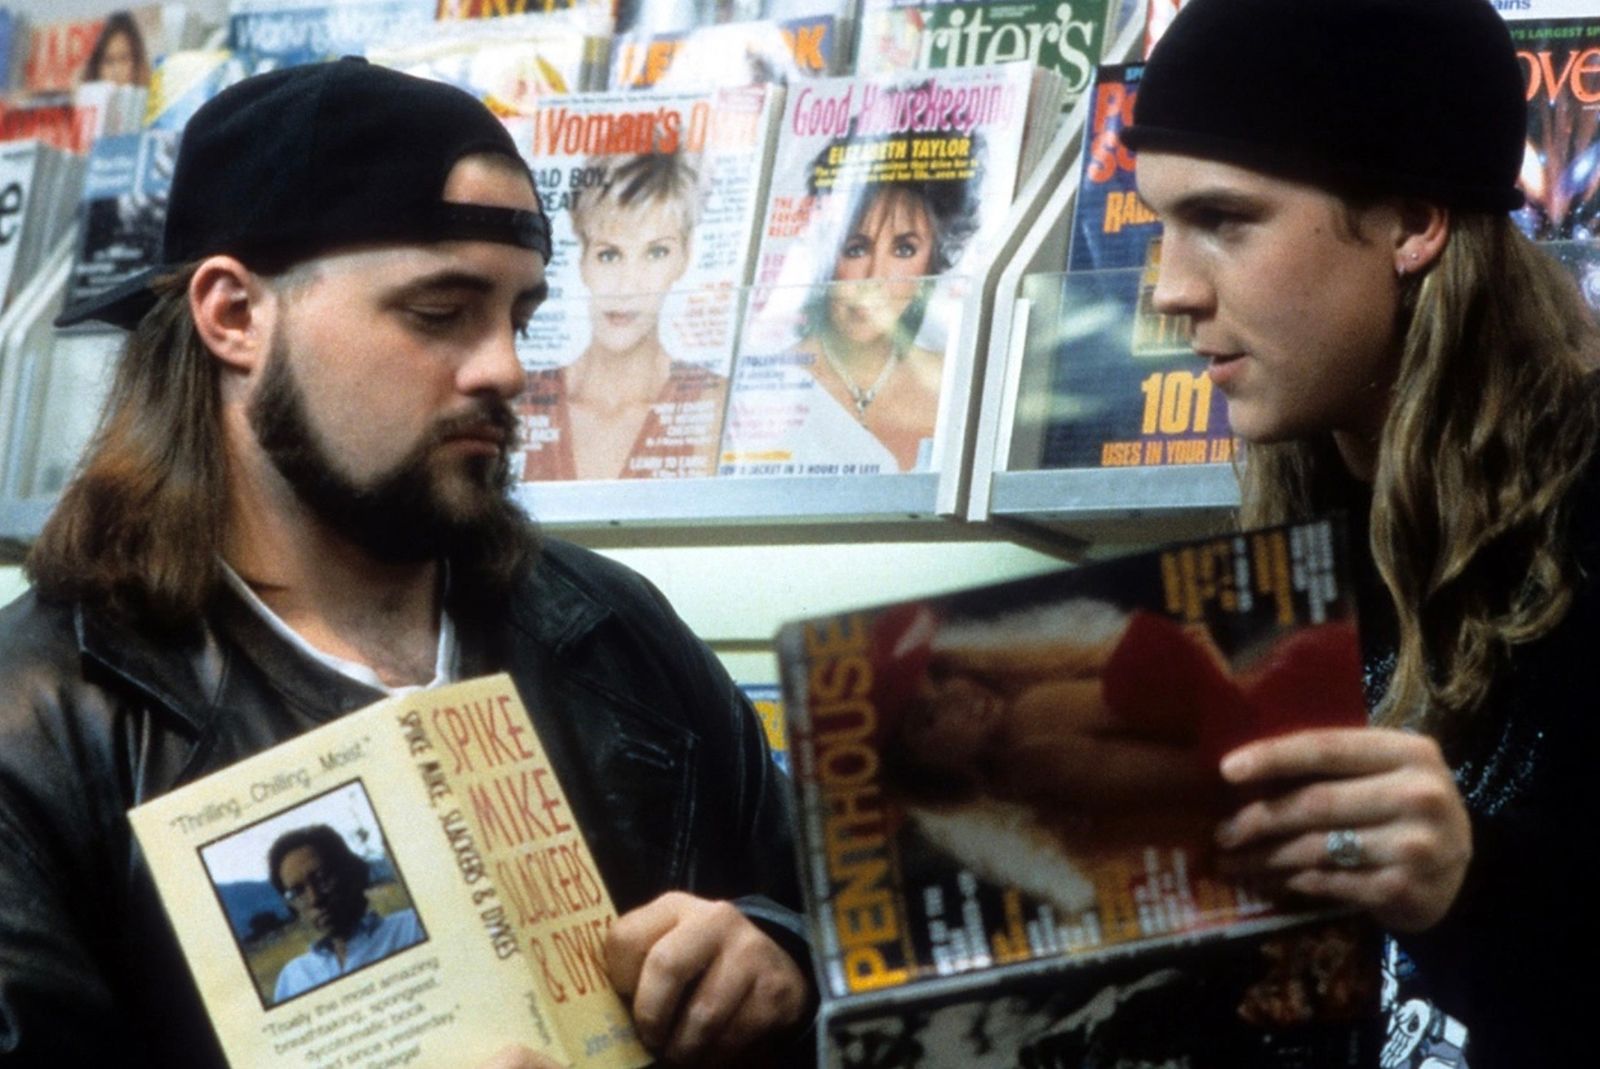 View Askewniverse movie order: Watch every Kevin Smith movie in chronological order photo 1